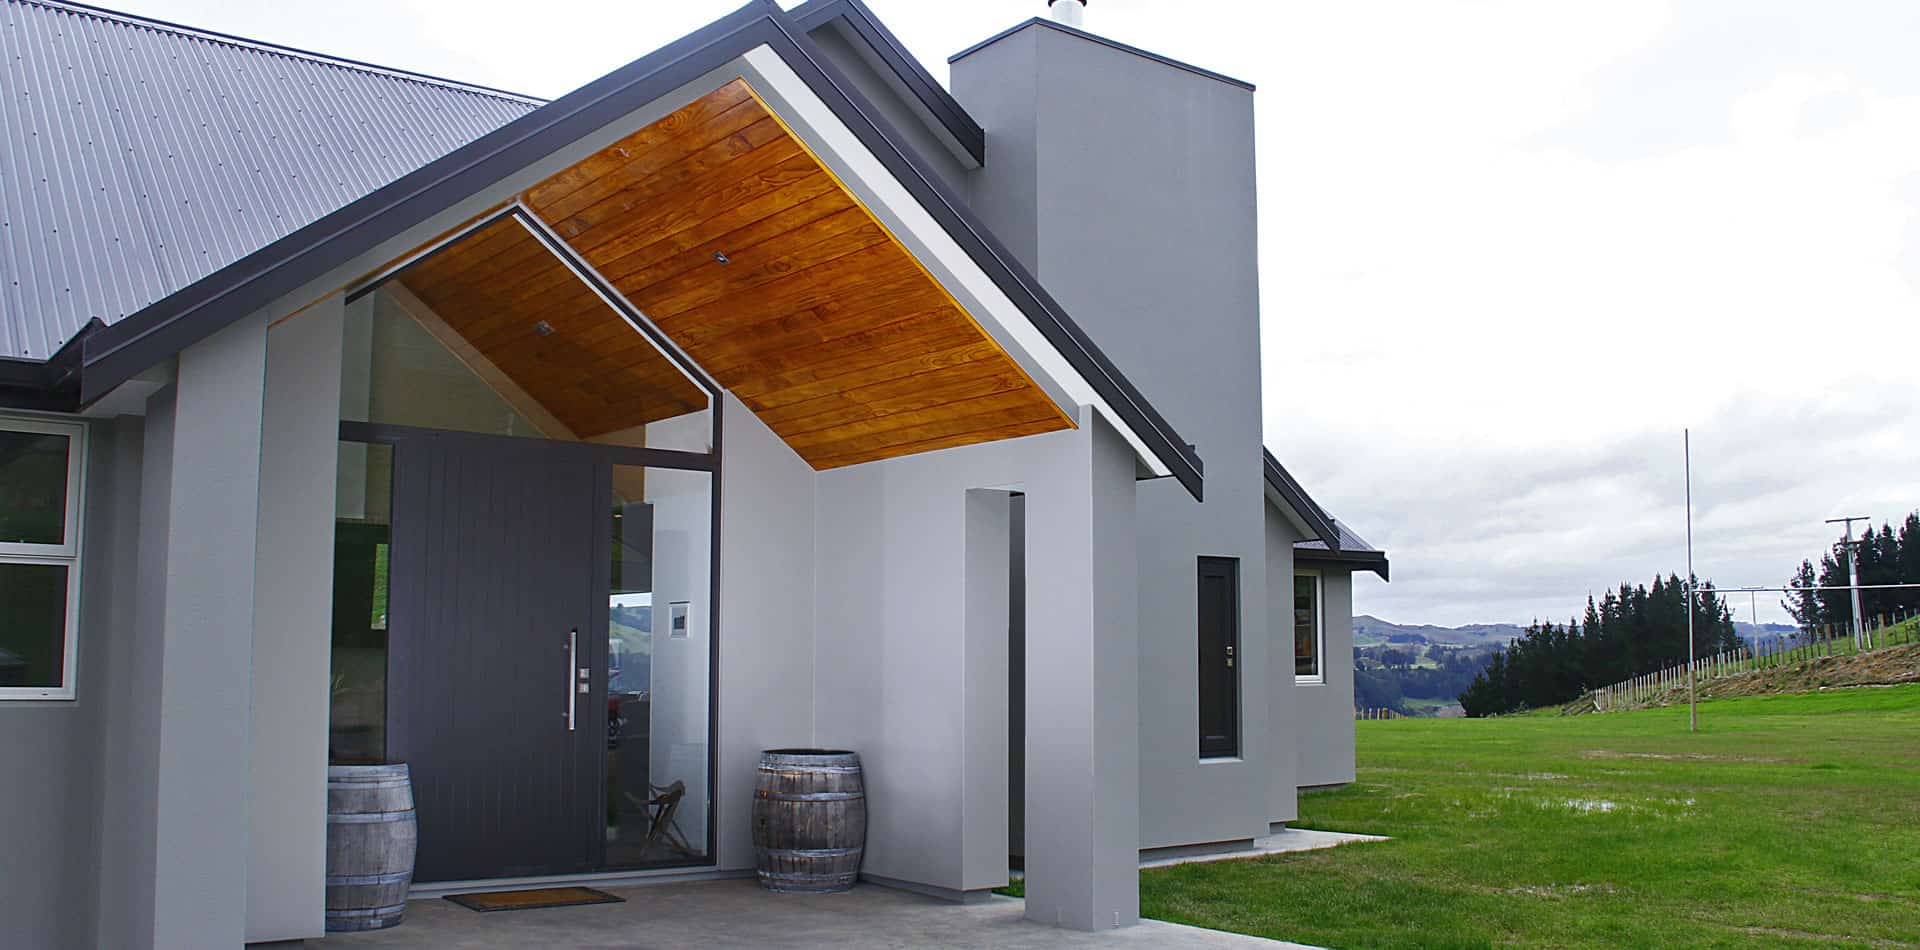 Fowler-Homes-design-and-build-new-zealand-wide-previous-builds-Manawatu-Terrace-7